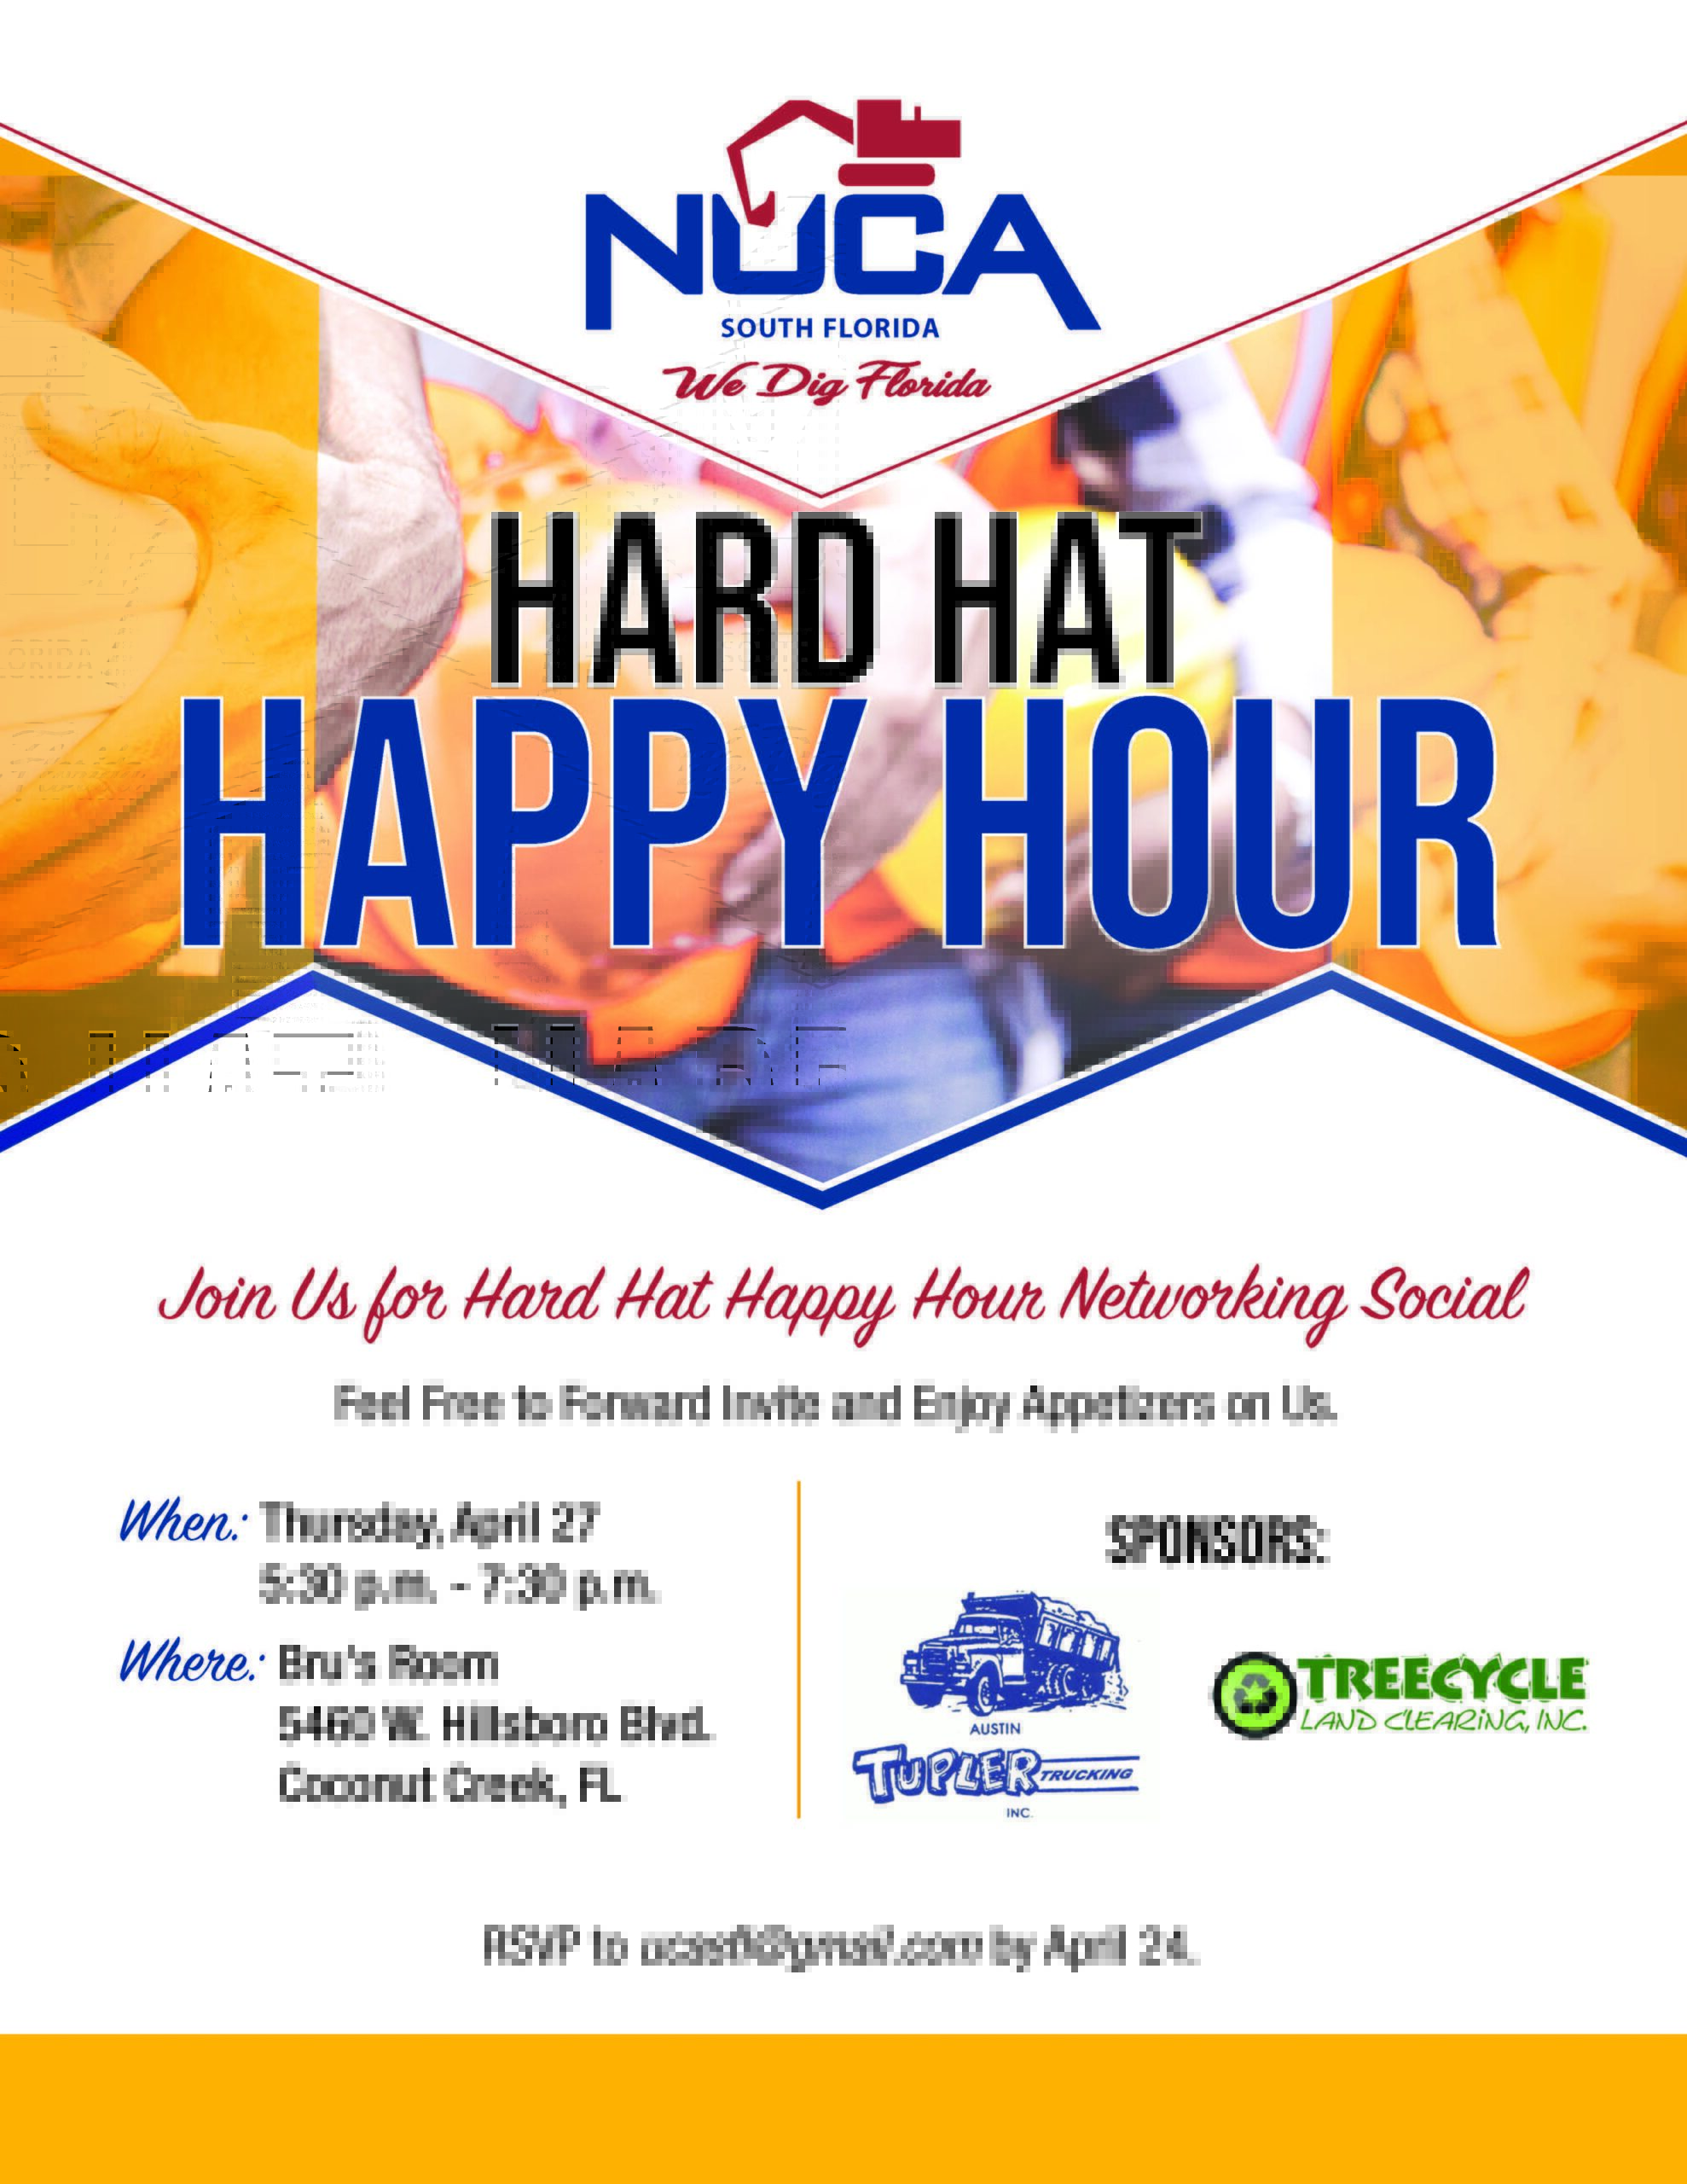 NUCA of South Florida Hard Hat Happy Hour